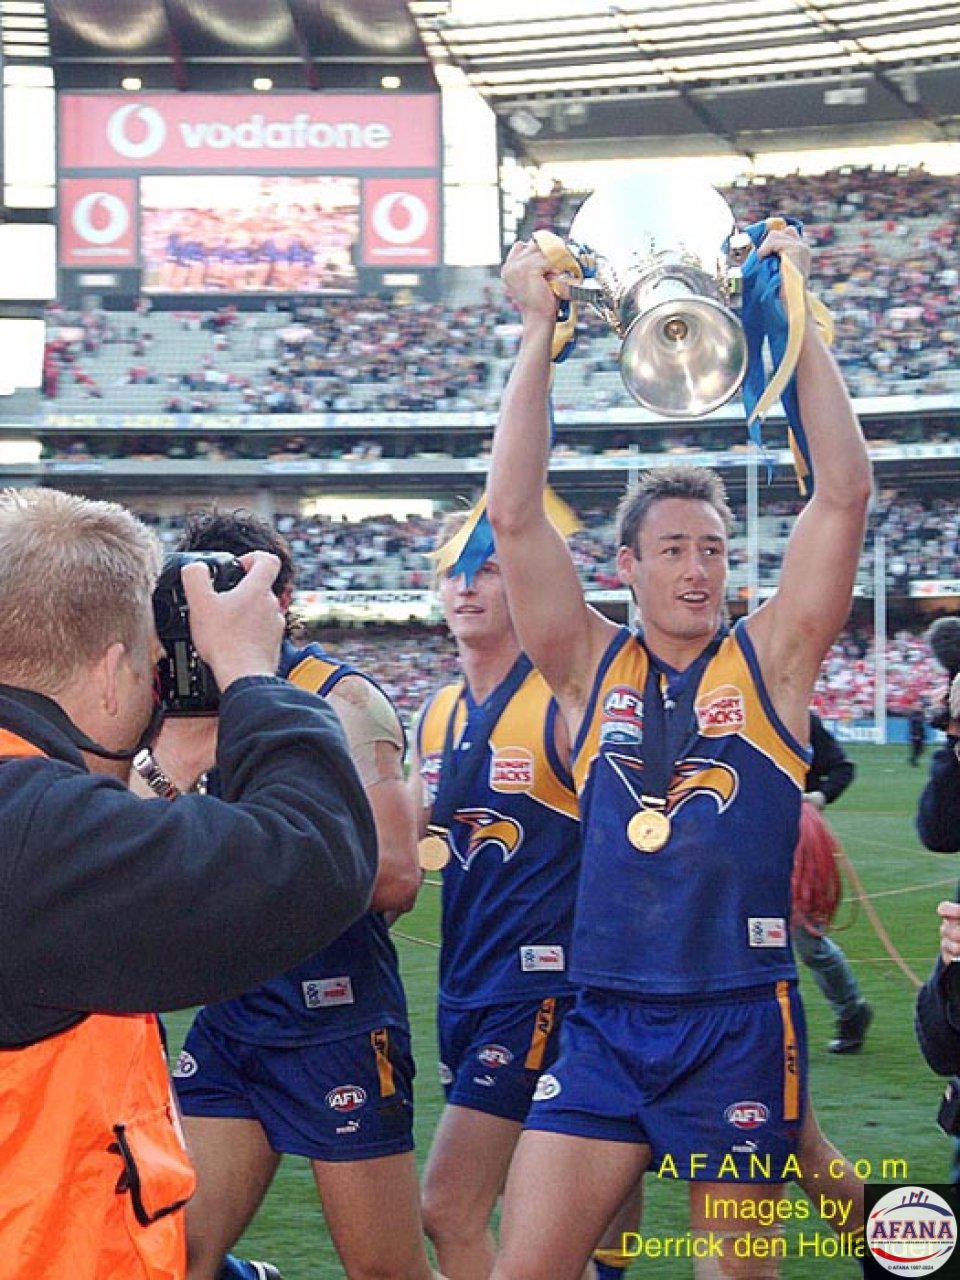 [b]The Eagles run their victory lap around the MCG after the 2006 AFL Grand Final[/b]